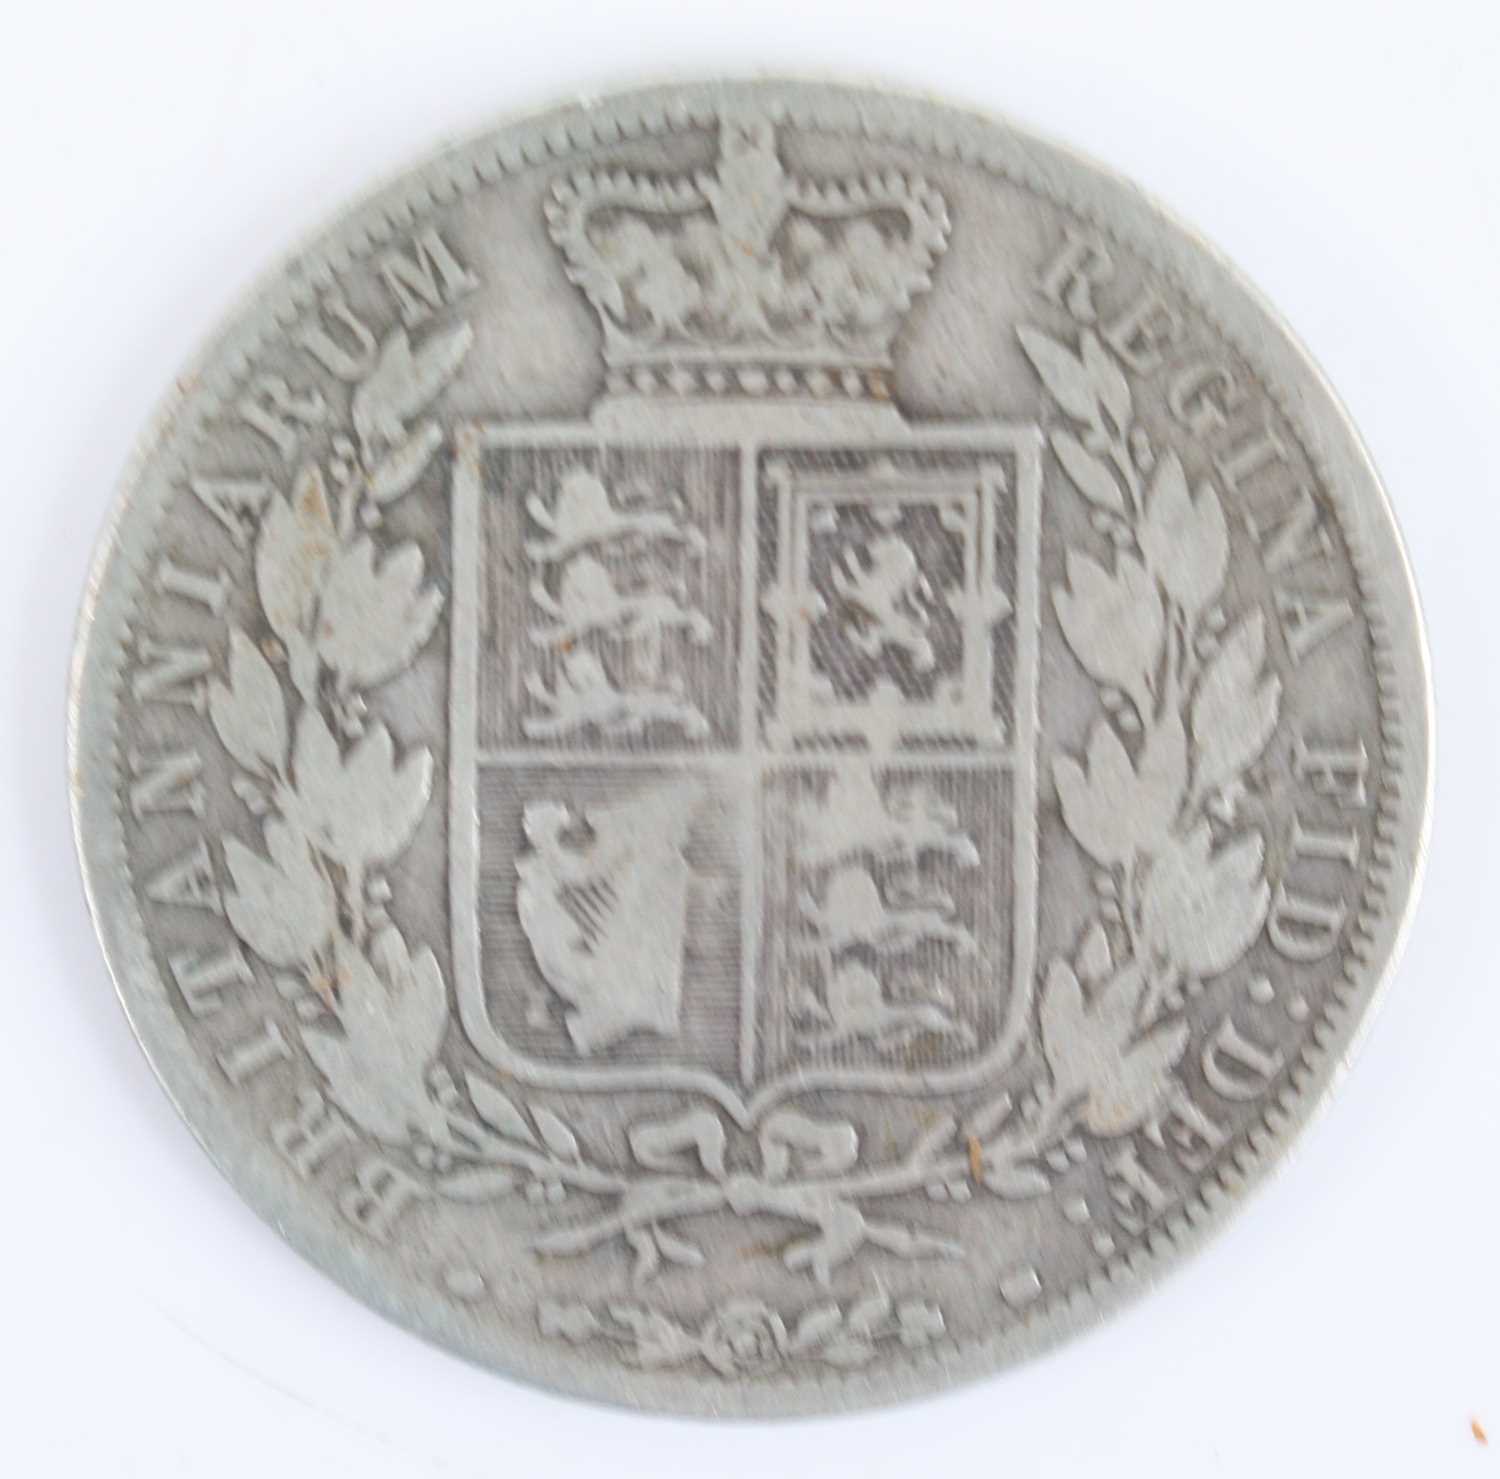 Great Britain, 1885 half crown, Victoria young bust, rev: crowned quartered shield within wreath, - Image 2 of 5